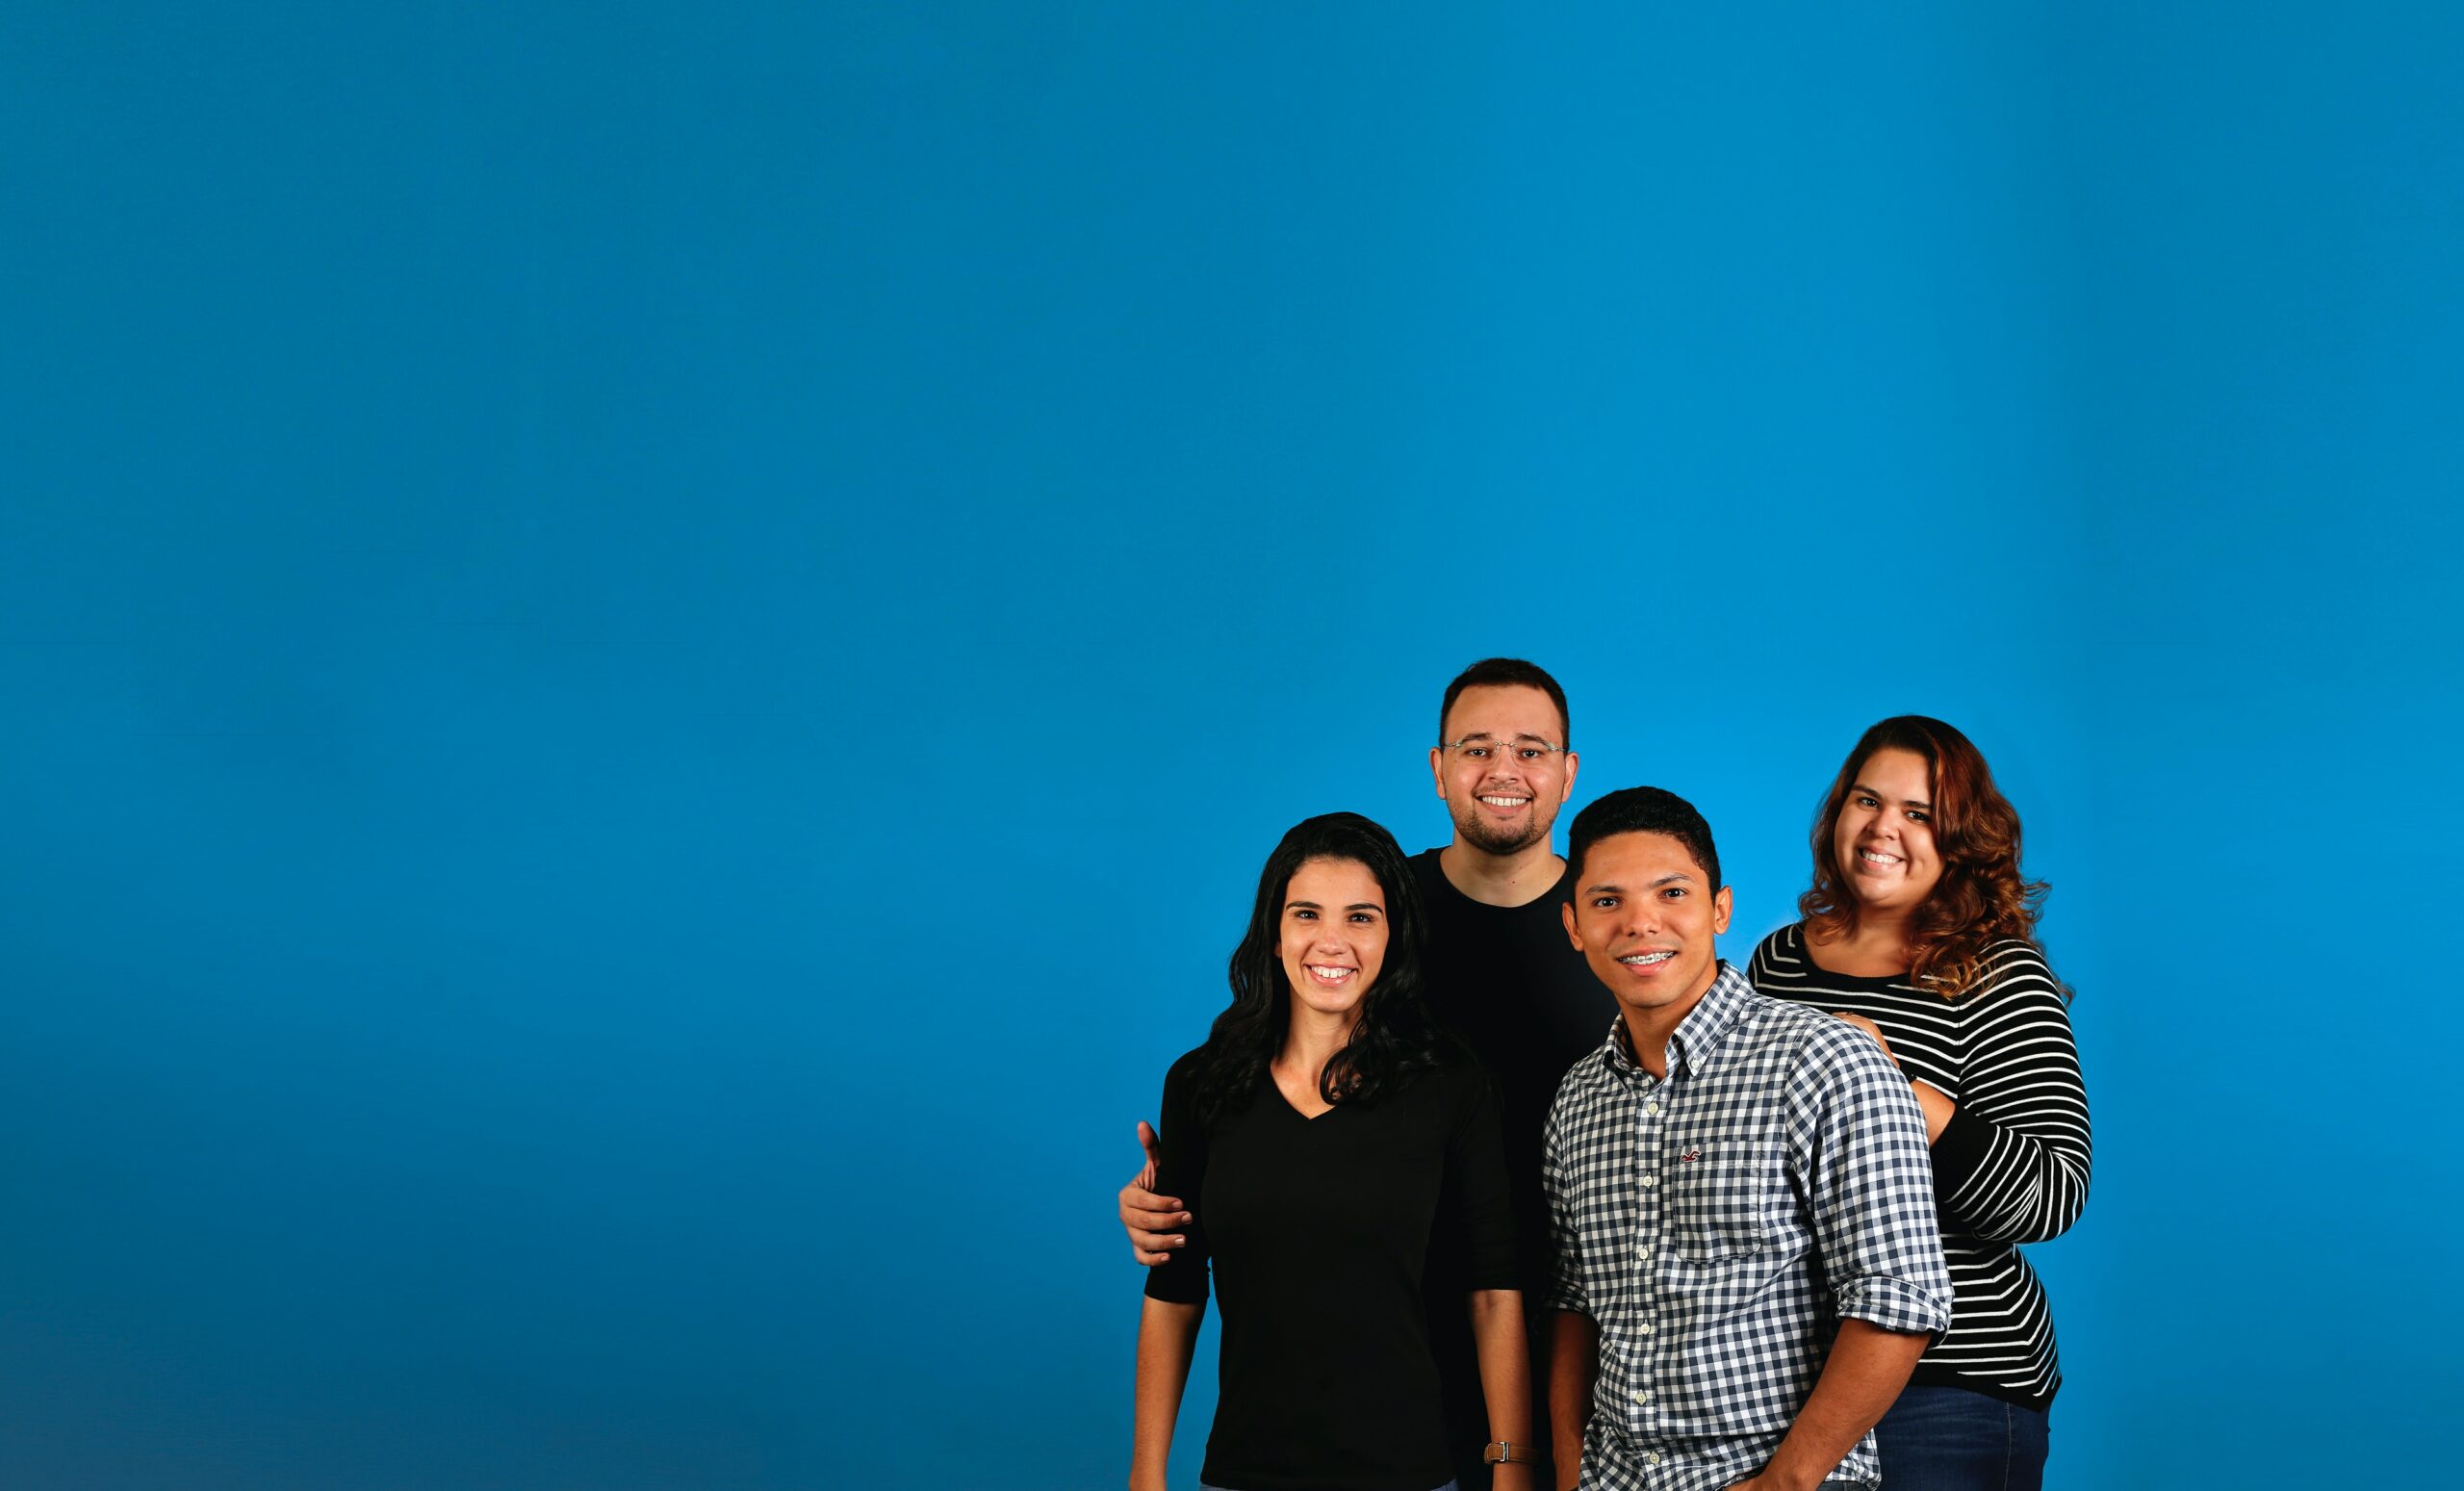 A mixed gender and ethnicity group of young employees in various work appropriate attire standing in front of a Goodwill blue background